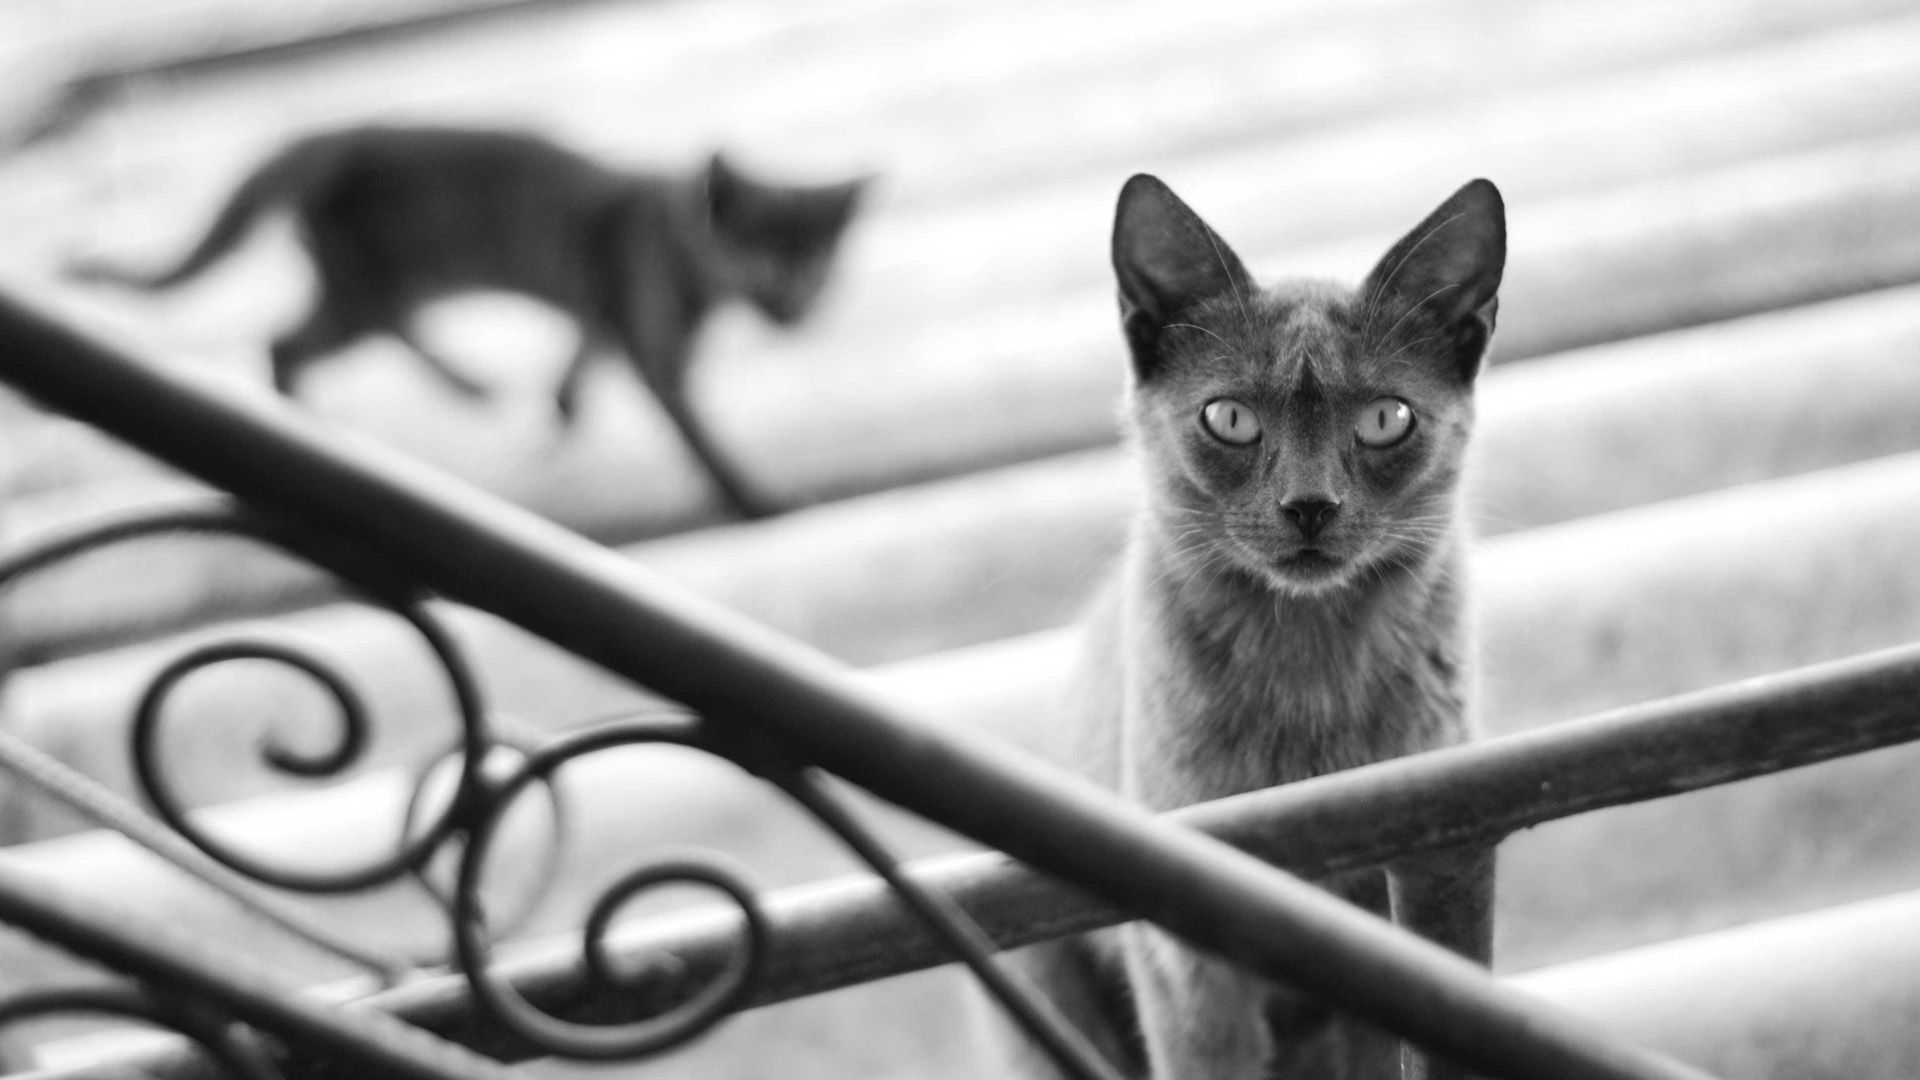 black and white, kitty, animals, silhouette, cat, kitten, blur, smooth, shadow, grey, steps, railings, handrail